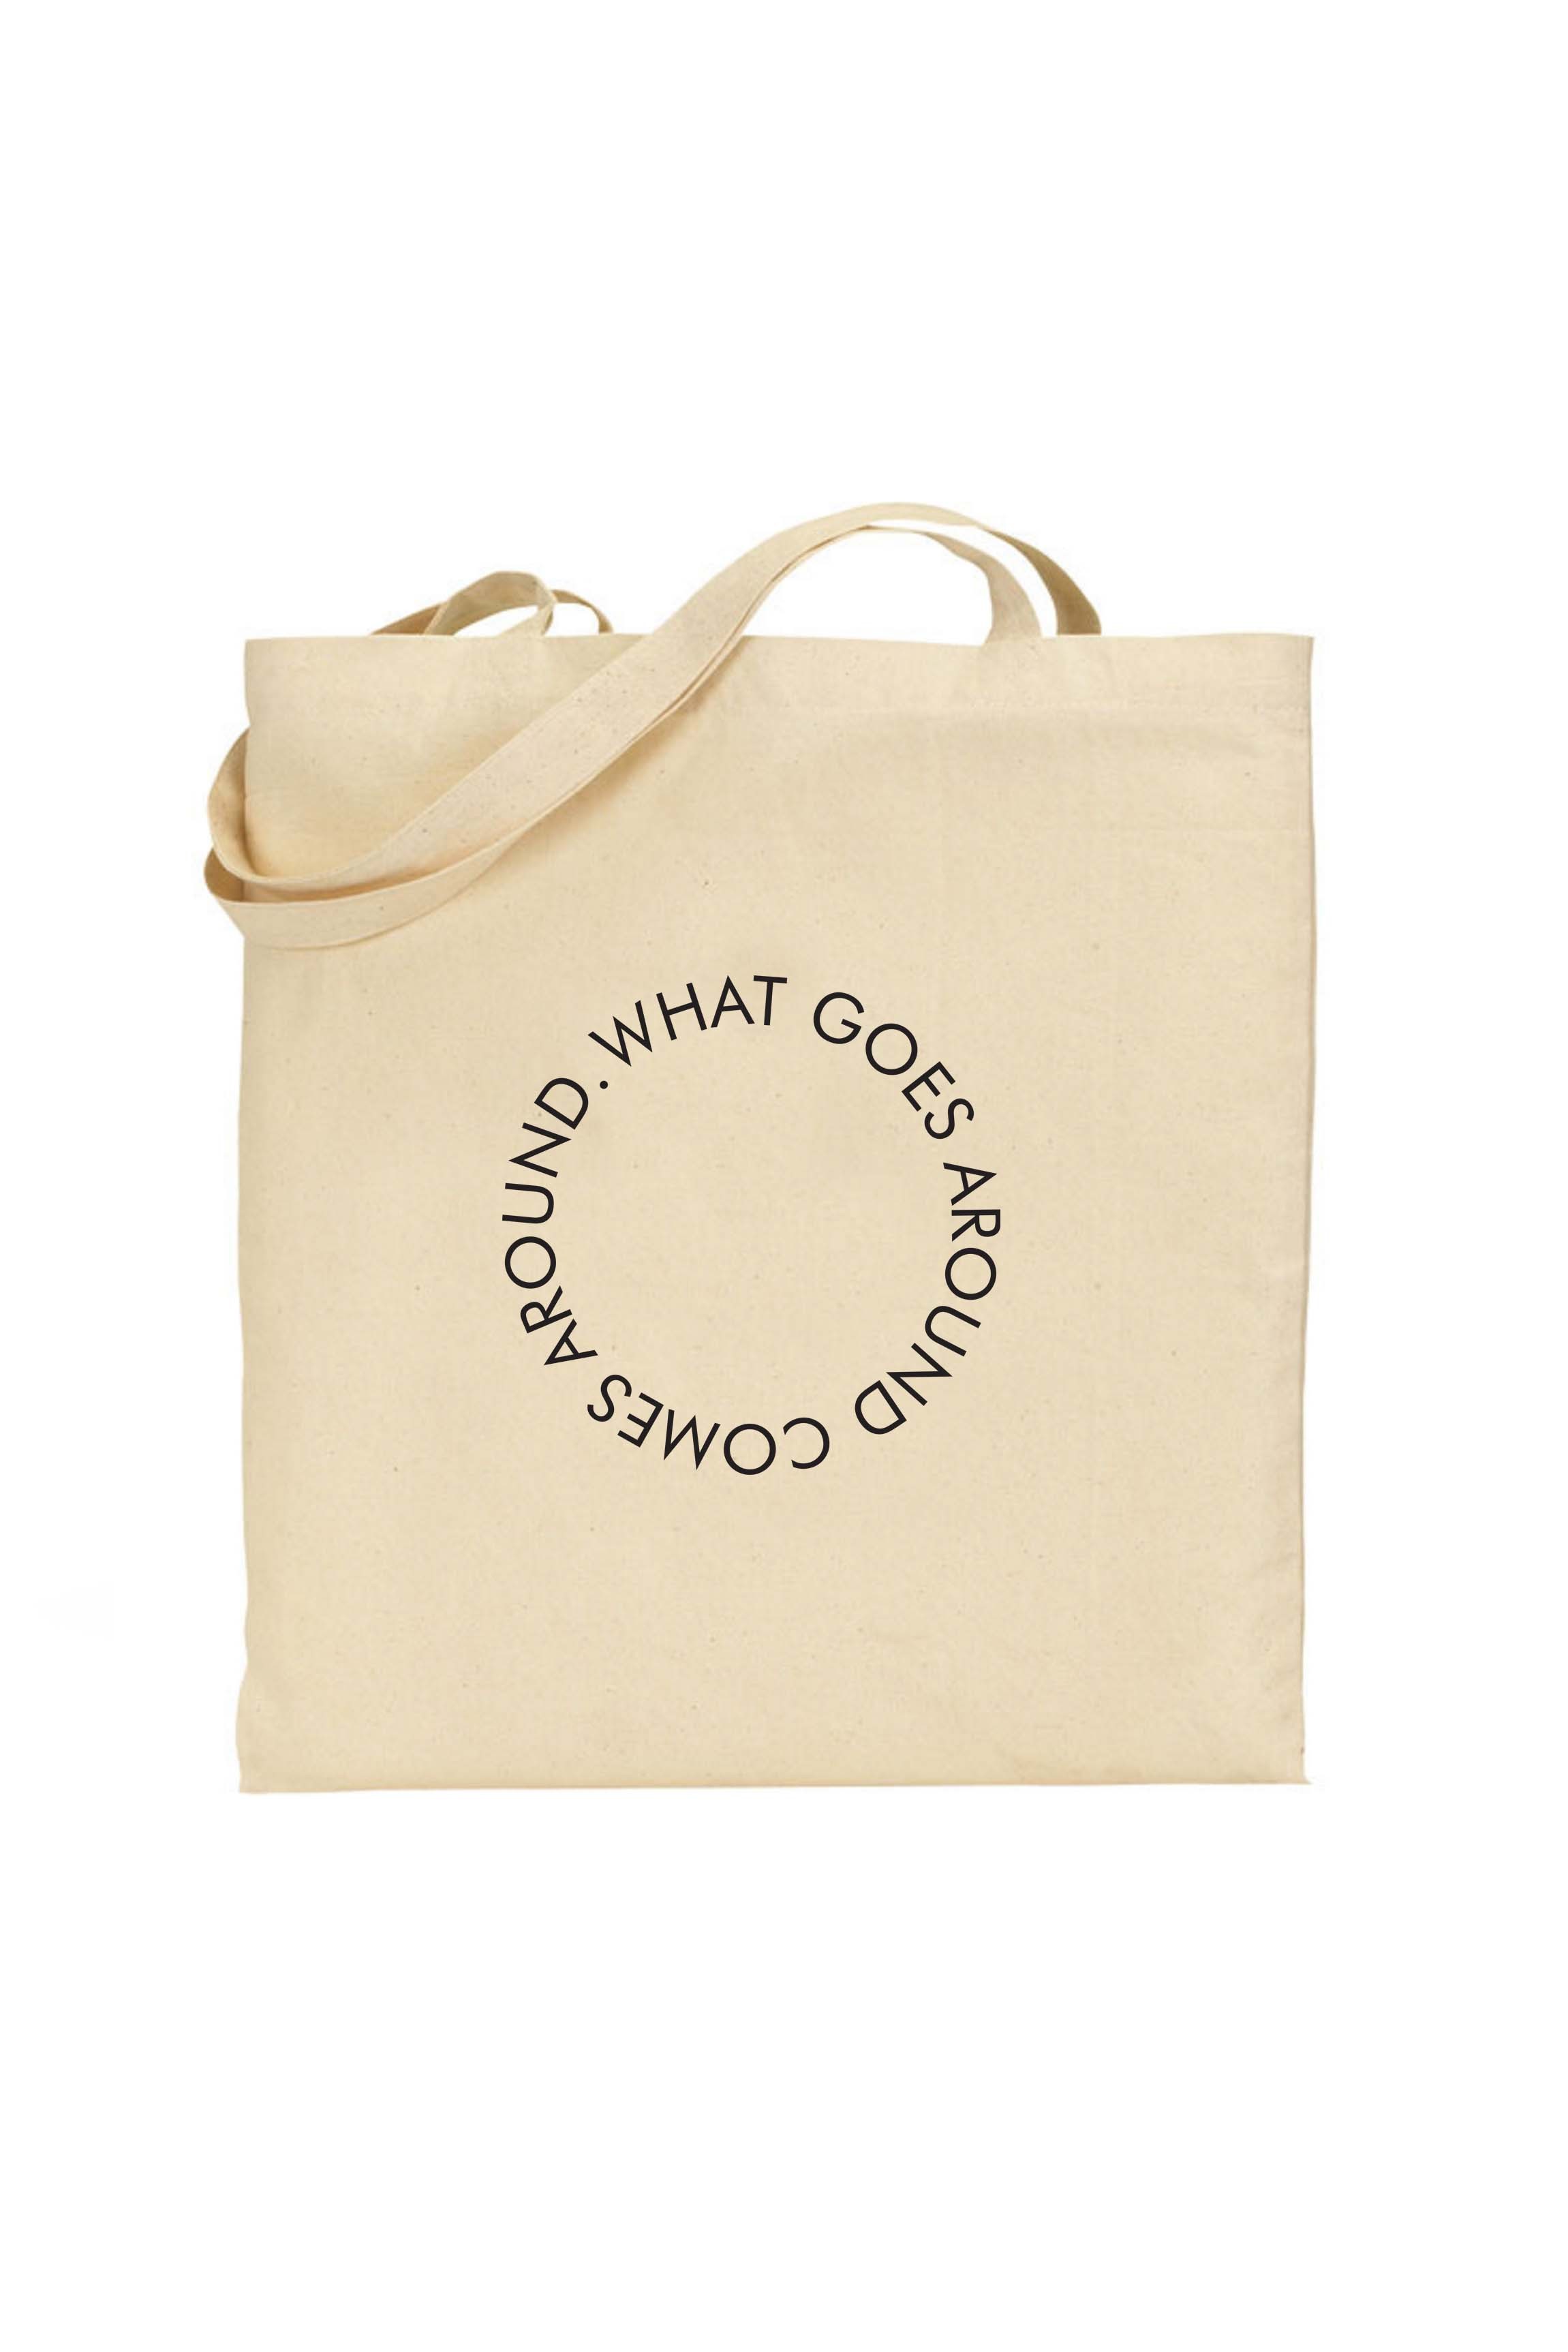 Tote bag What Goes Around Comes Around - Quotes - Popular themes - Designs